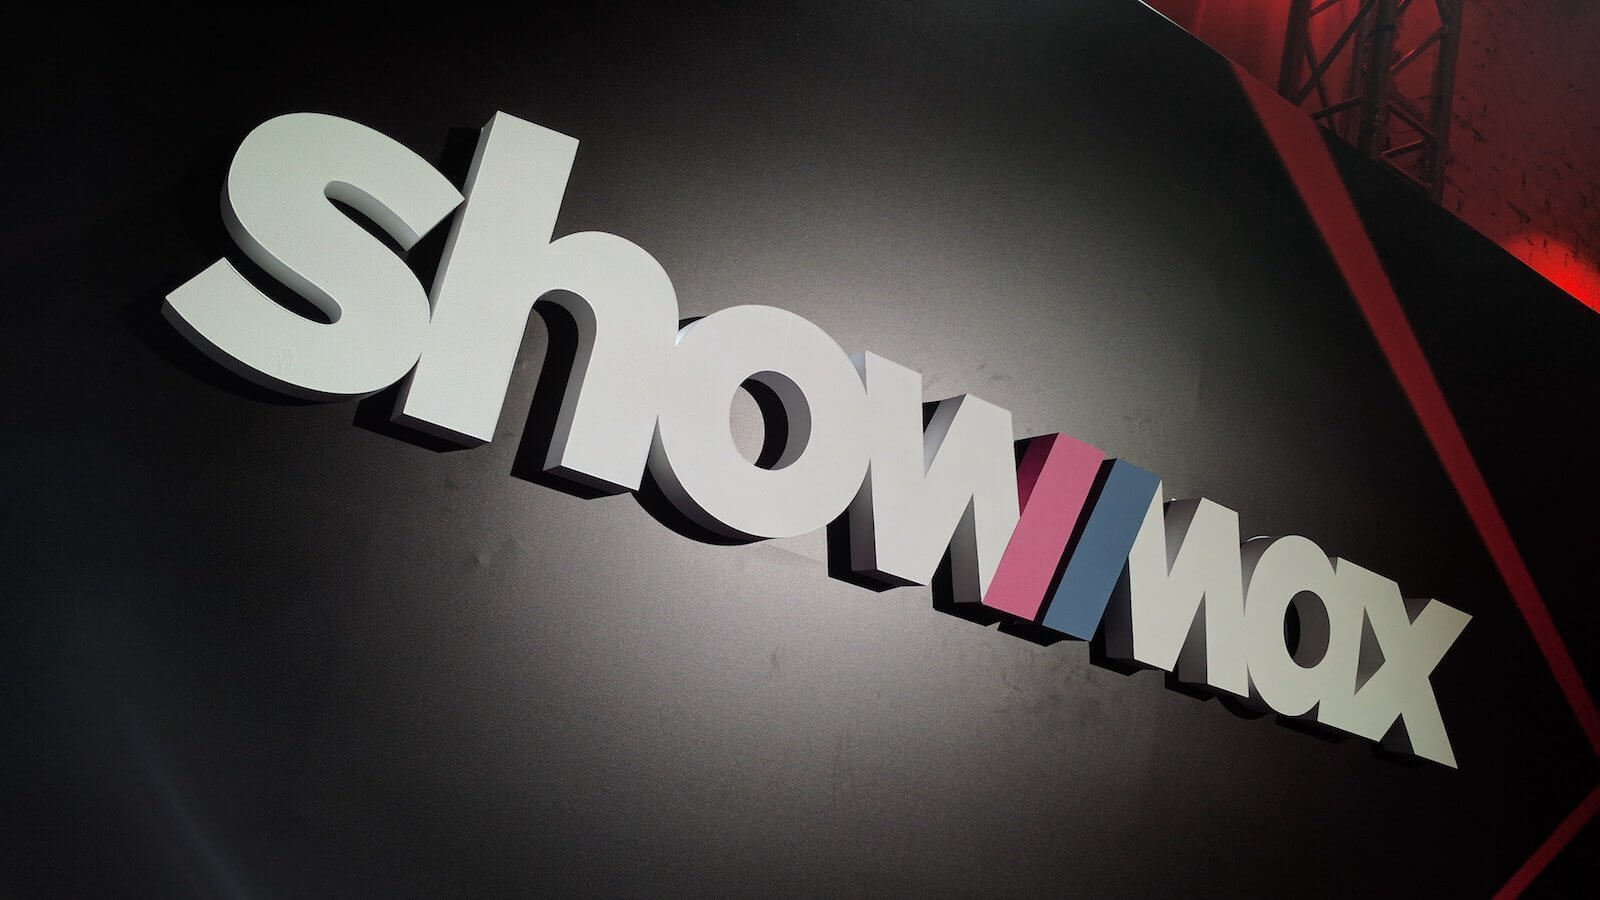 Showmax: Price, Packages, TV Series, Movies & More [2020 Guide]